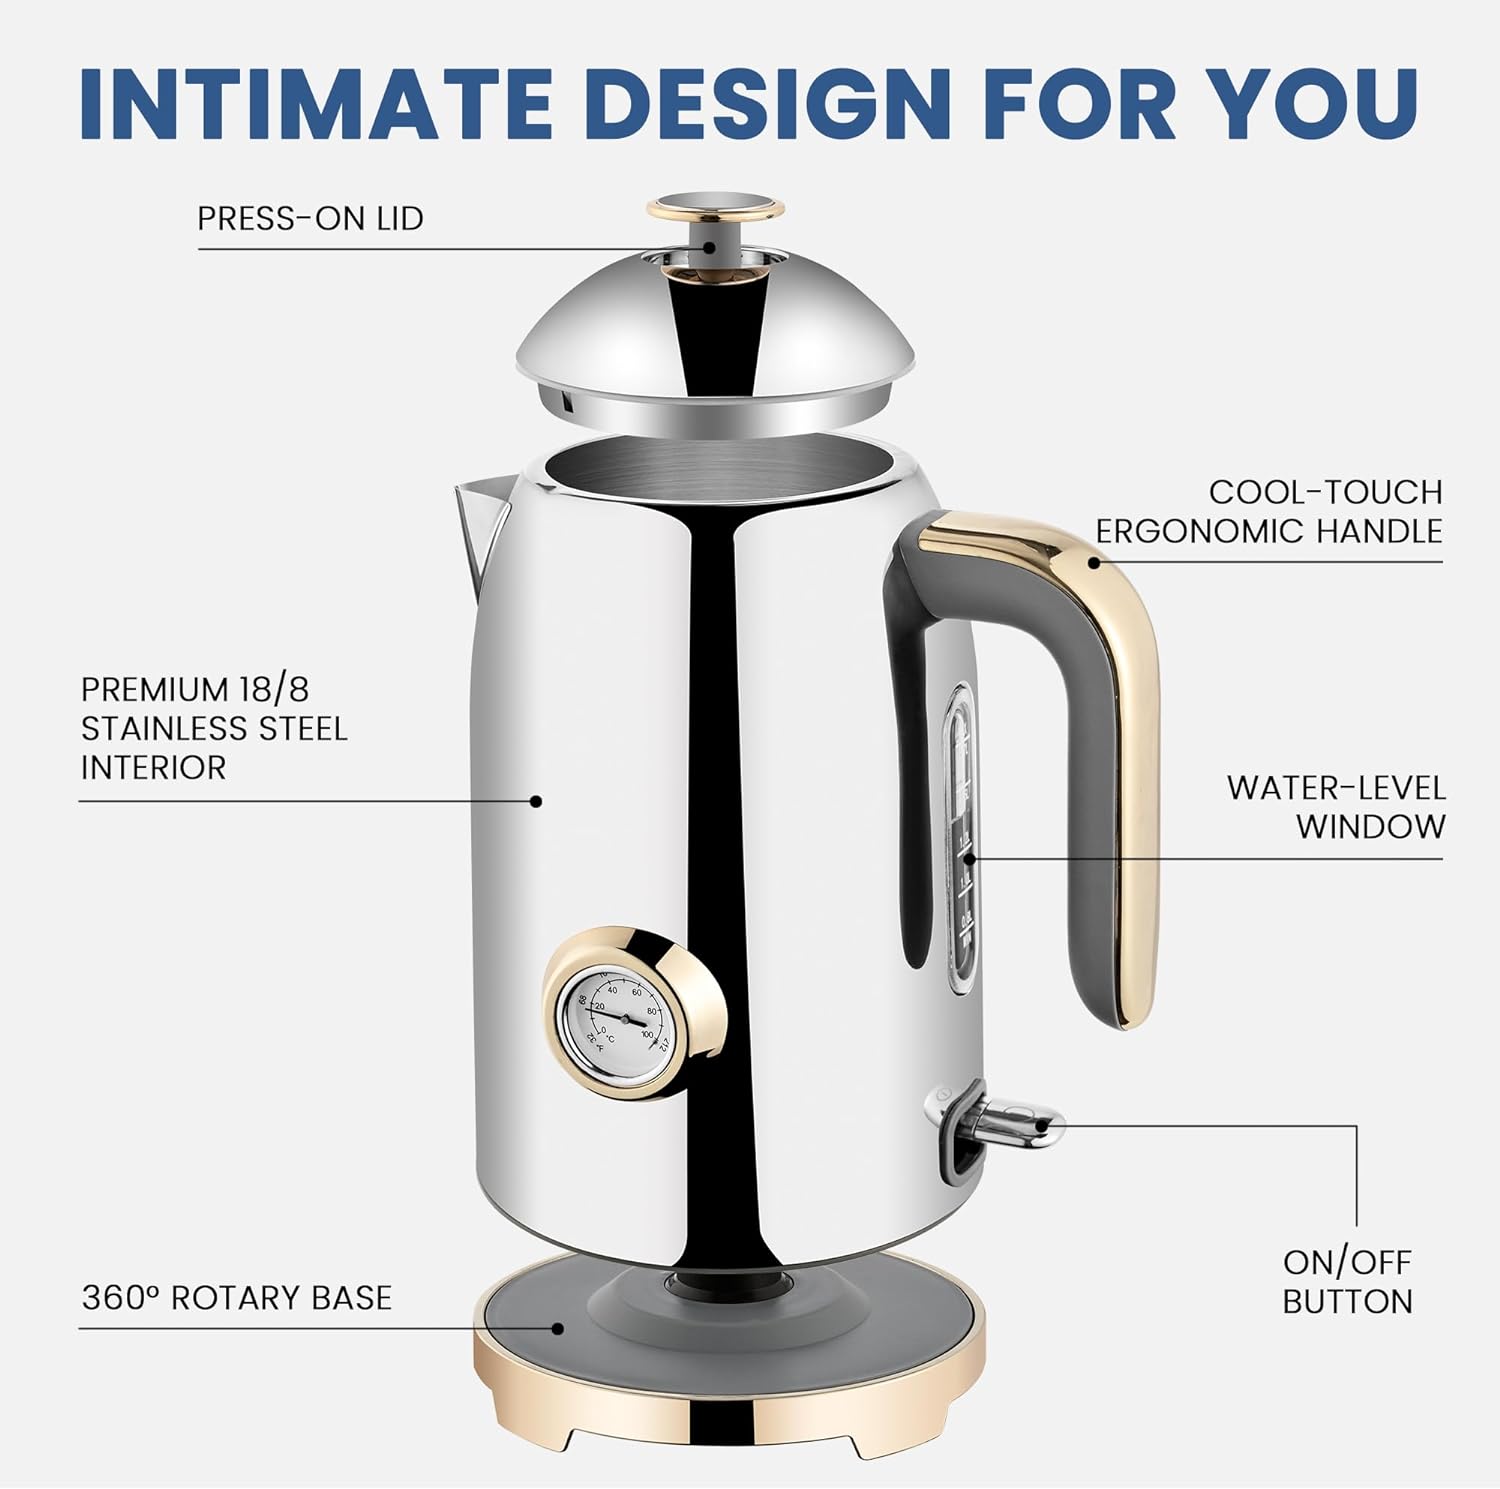 SUSTEAS Electric Kettle - 57oz Hot Tea Kettle Water Boiler with Thermometer, 1500W Fast Heating Stainless Steel Tea Pot, Cordless with LED Indicator, Auto Shut-Off  Boil Dry Protection, Beige